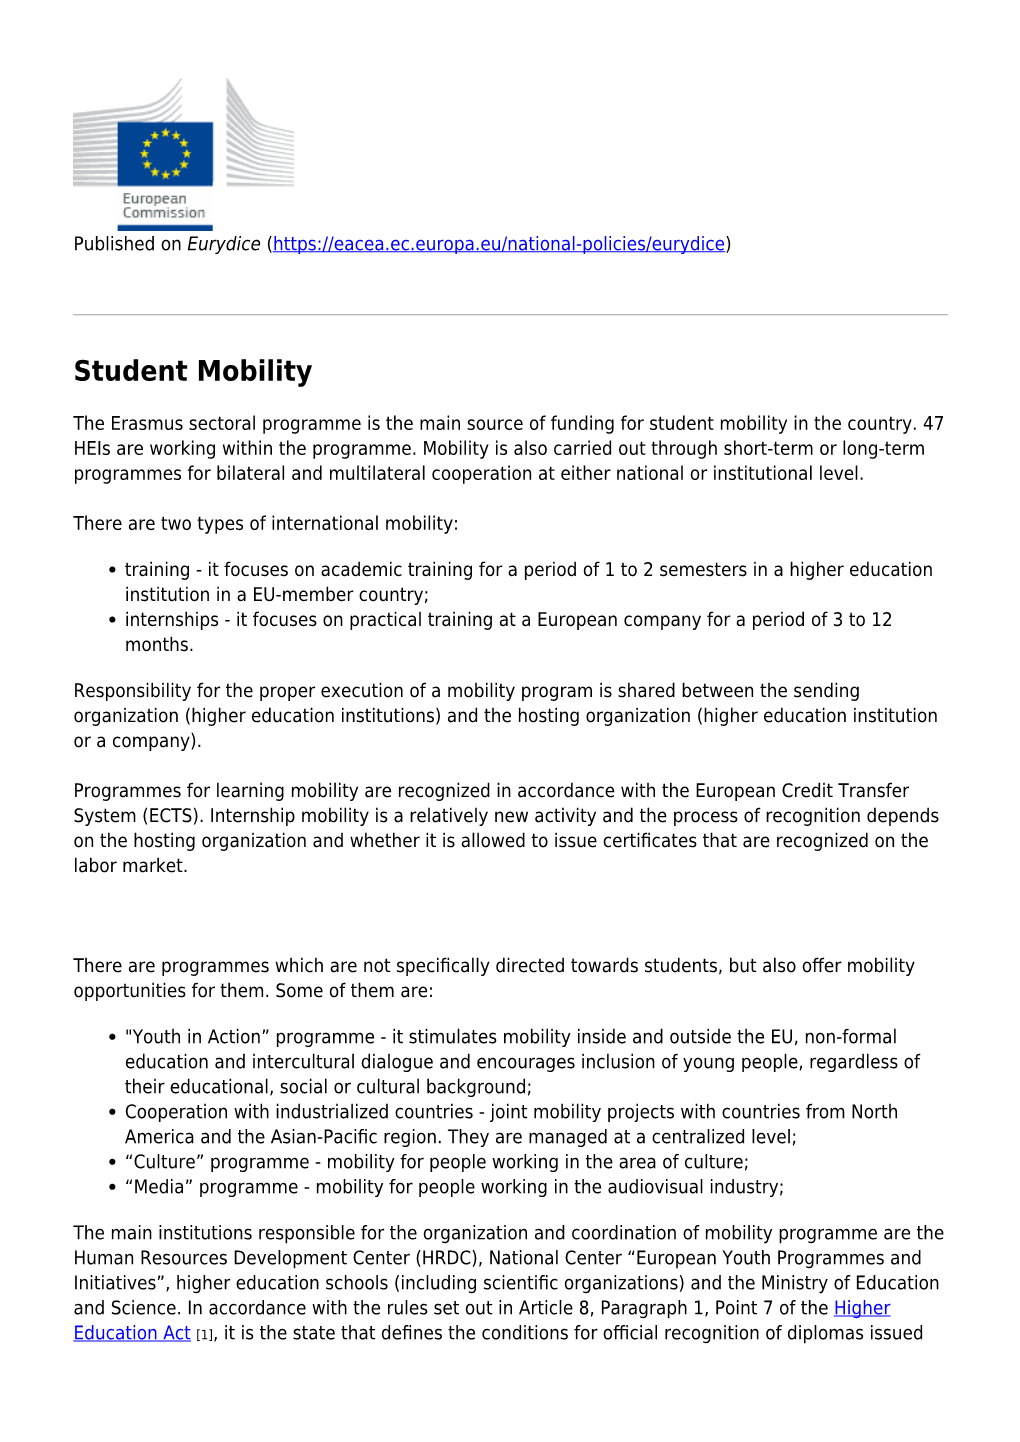 Mobility in Higher Education